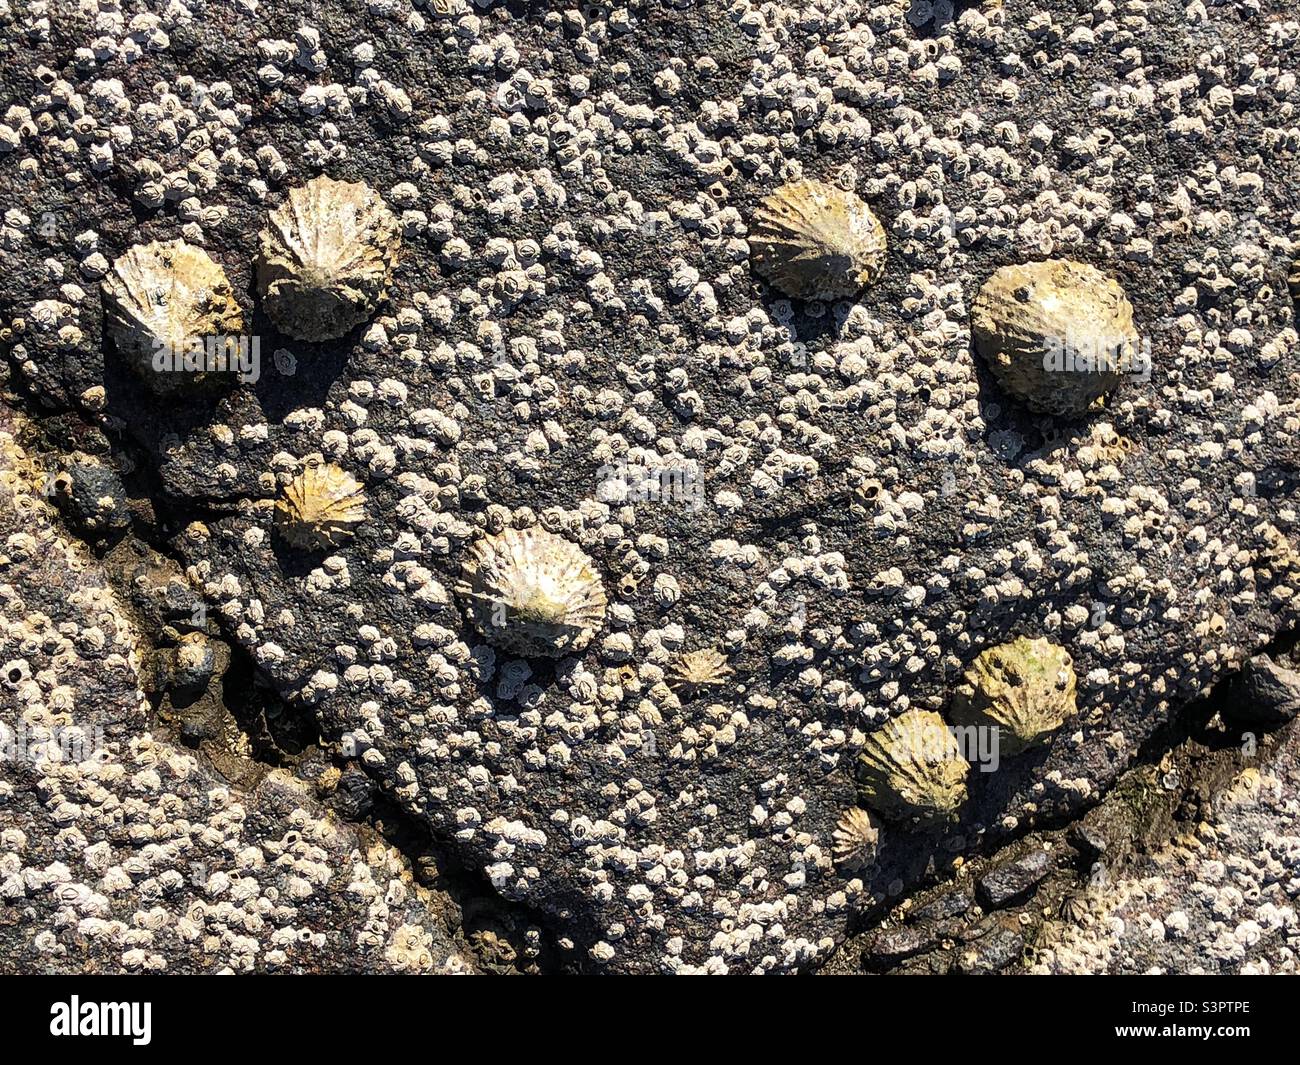 Limpet shells visible at low tide Stock Photo